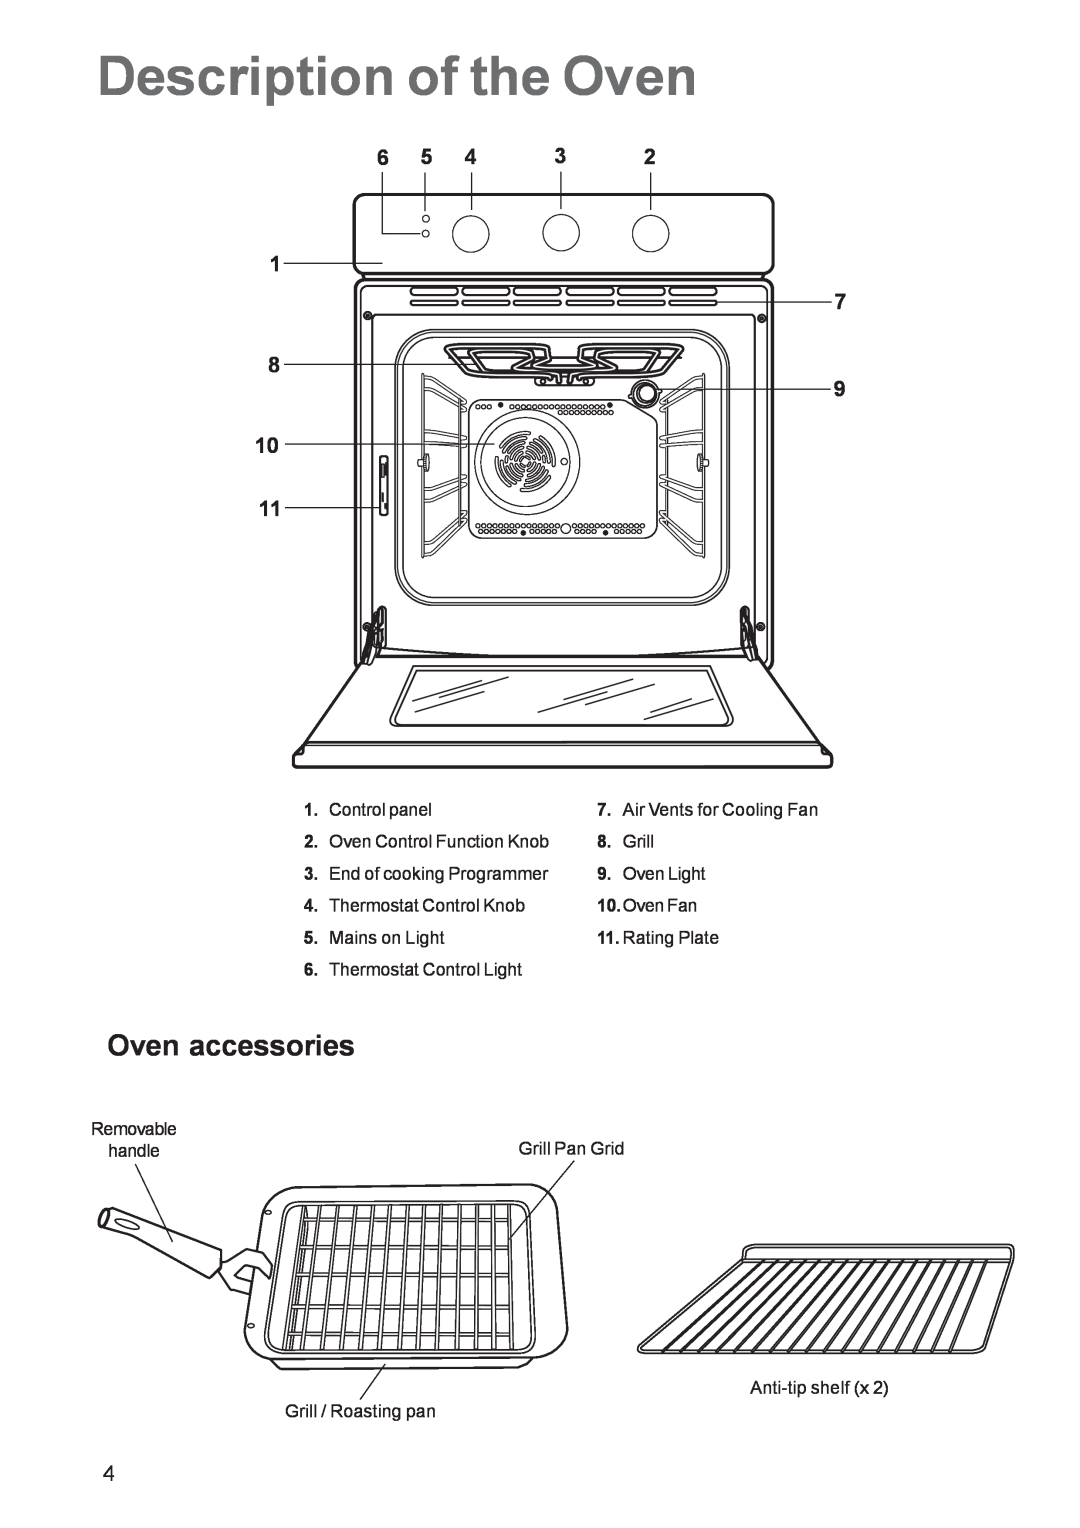 Electrolux EOB 5700 Description of the Oven, Oven accessories, Control panel, Oven Control Function Knob, Grill, Oven Fan 